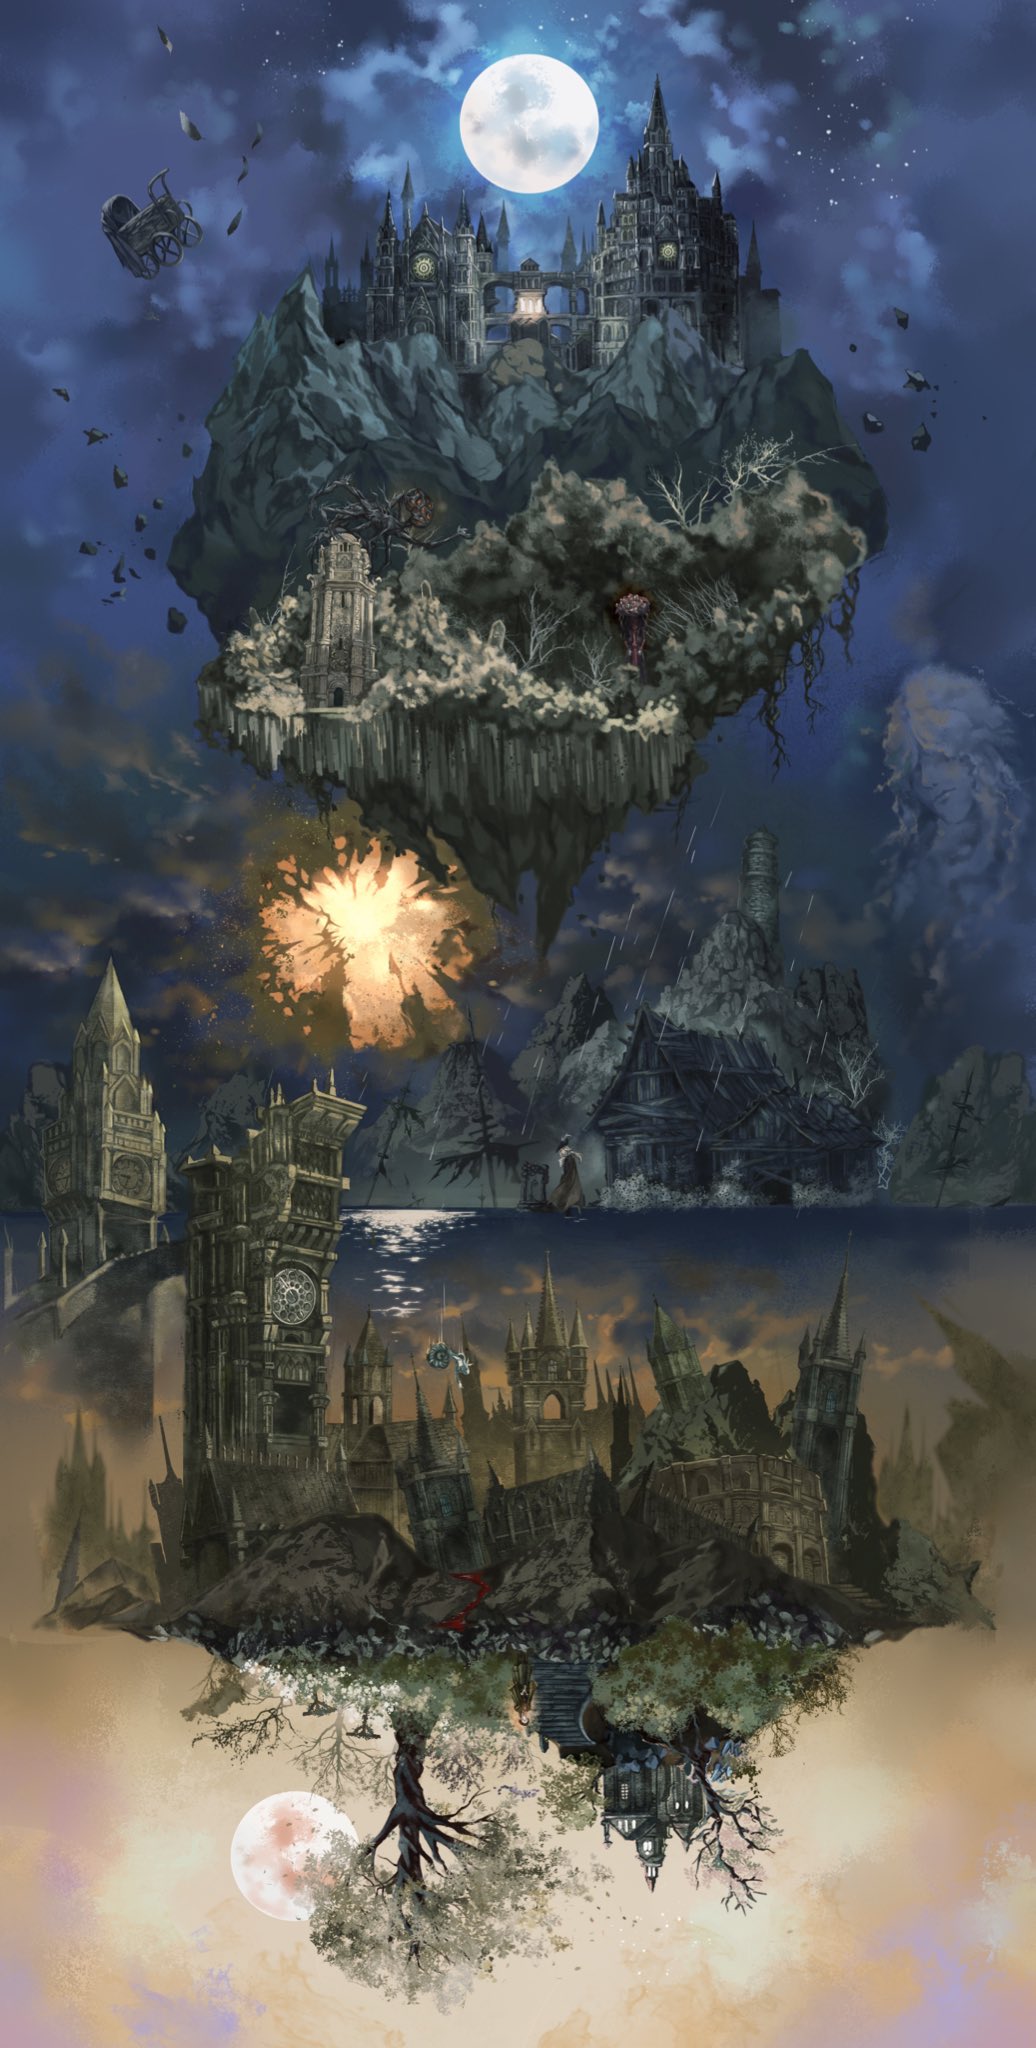 3girls amygdala architecture ascot blood bloodborne bonnet brain_of_mensis bush clock clock_tower clouds cloudy_sky coat day doll dress eldritch_abomination flying_buttress full_moon gothic gothic_architecture hat hat_feather highres kos_(bloodborne) lady_maria_of_the_astral_clocktower mergo's_wet_nurse moon multiple_girls night night_sky orphan_of_kos plain_doll ponytail post-apocalypse rain river riverbank roots ruins scenery sky star_(sky) starry_sky tower tree tricorne upside-down watchtower white_hair yharnam yujia0412